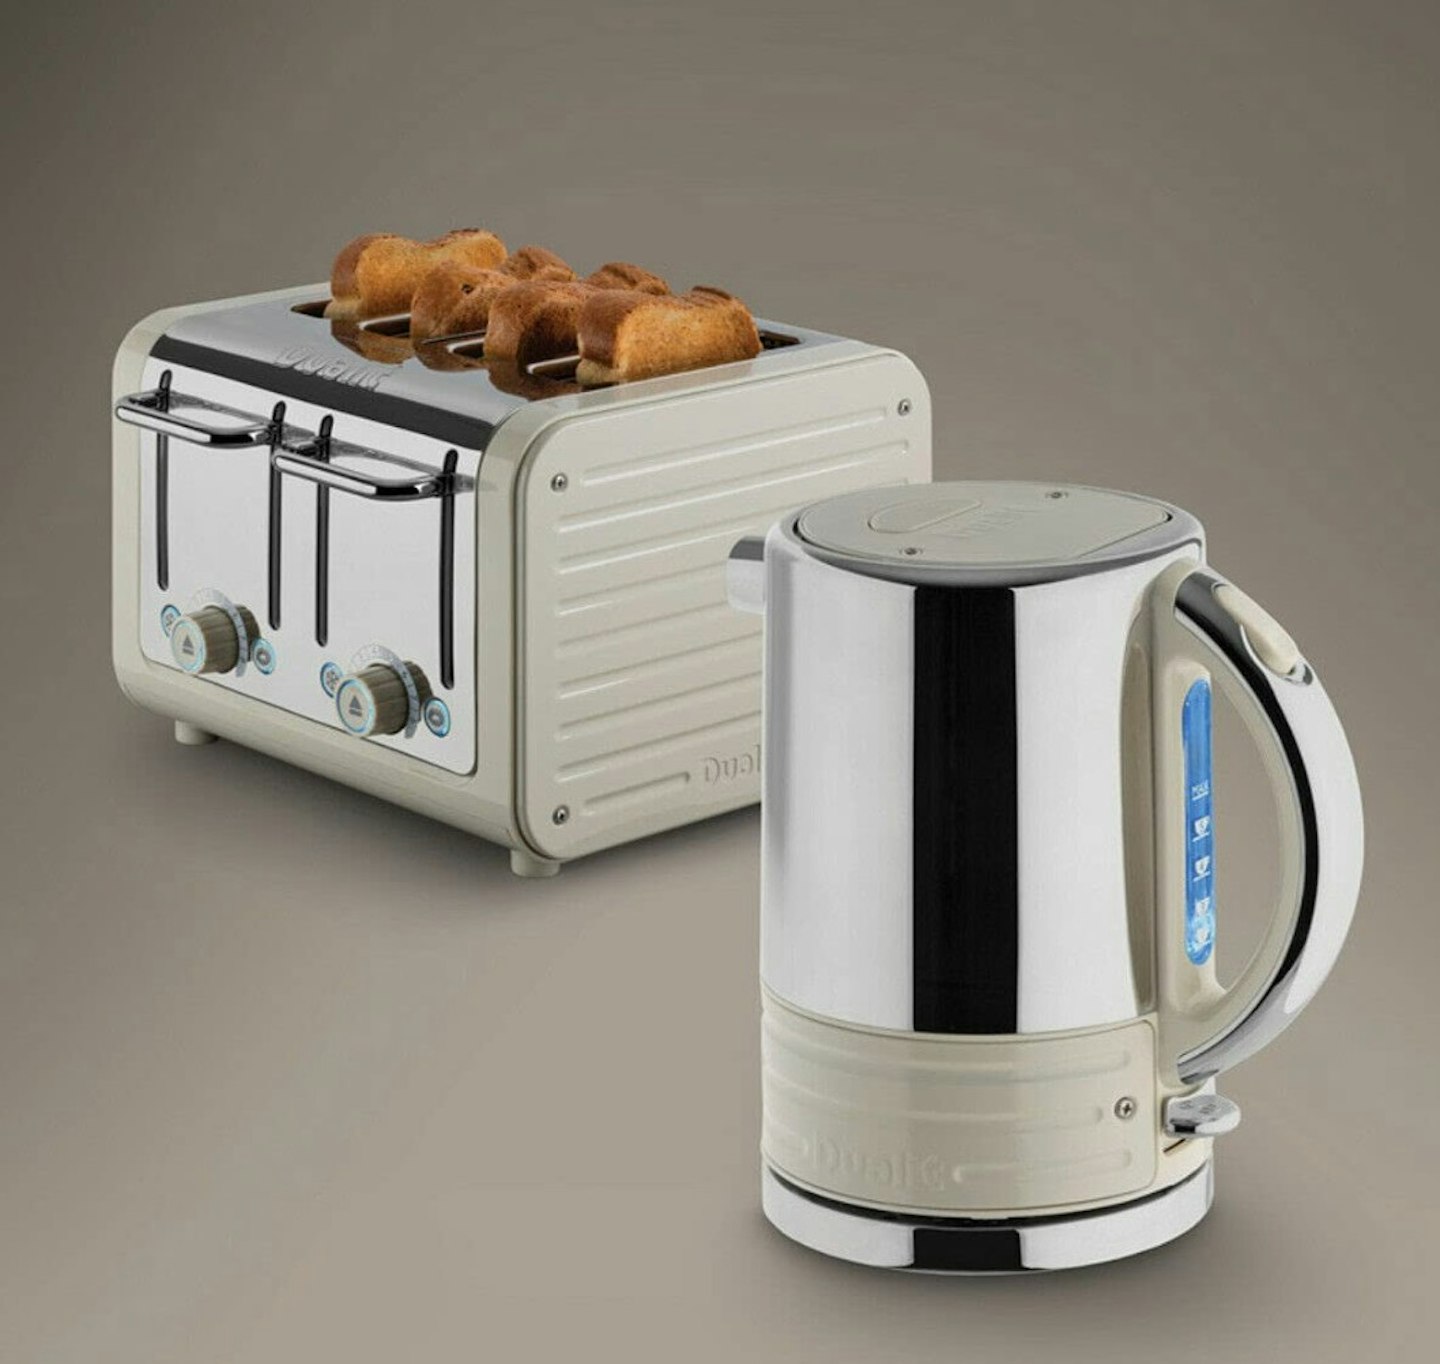  Dualit Architect Stainless Steel Kettle & 4 Slice Toaster Set Oyster White